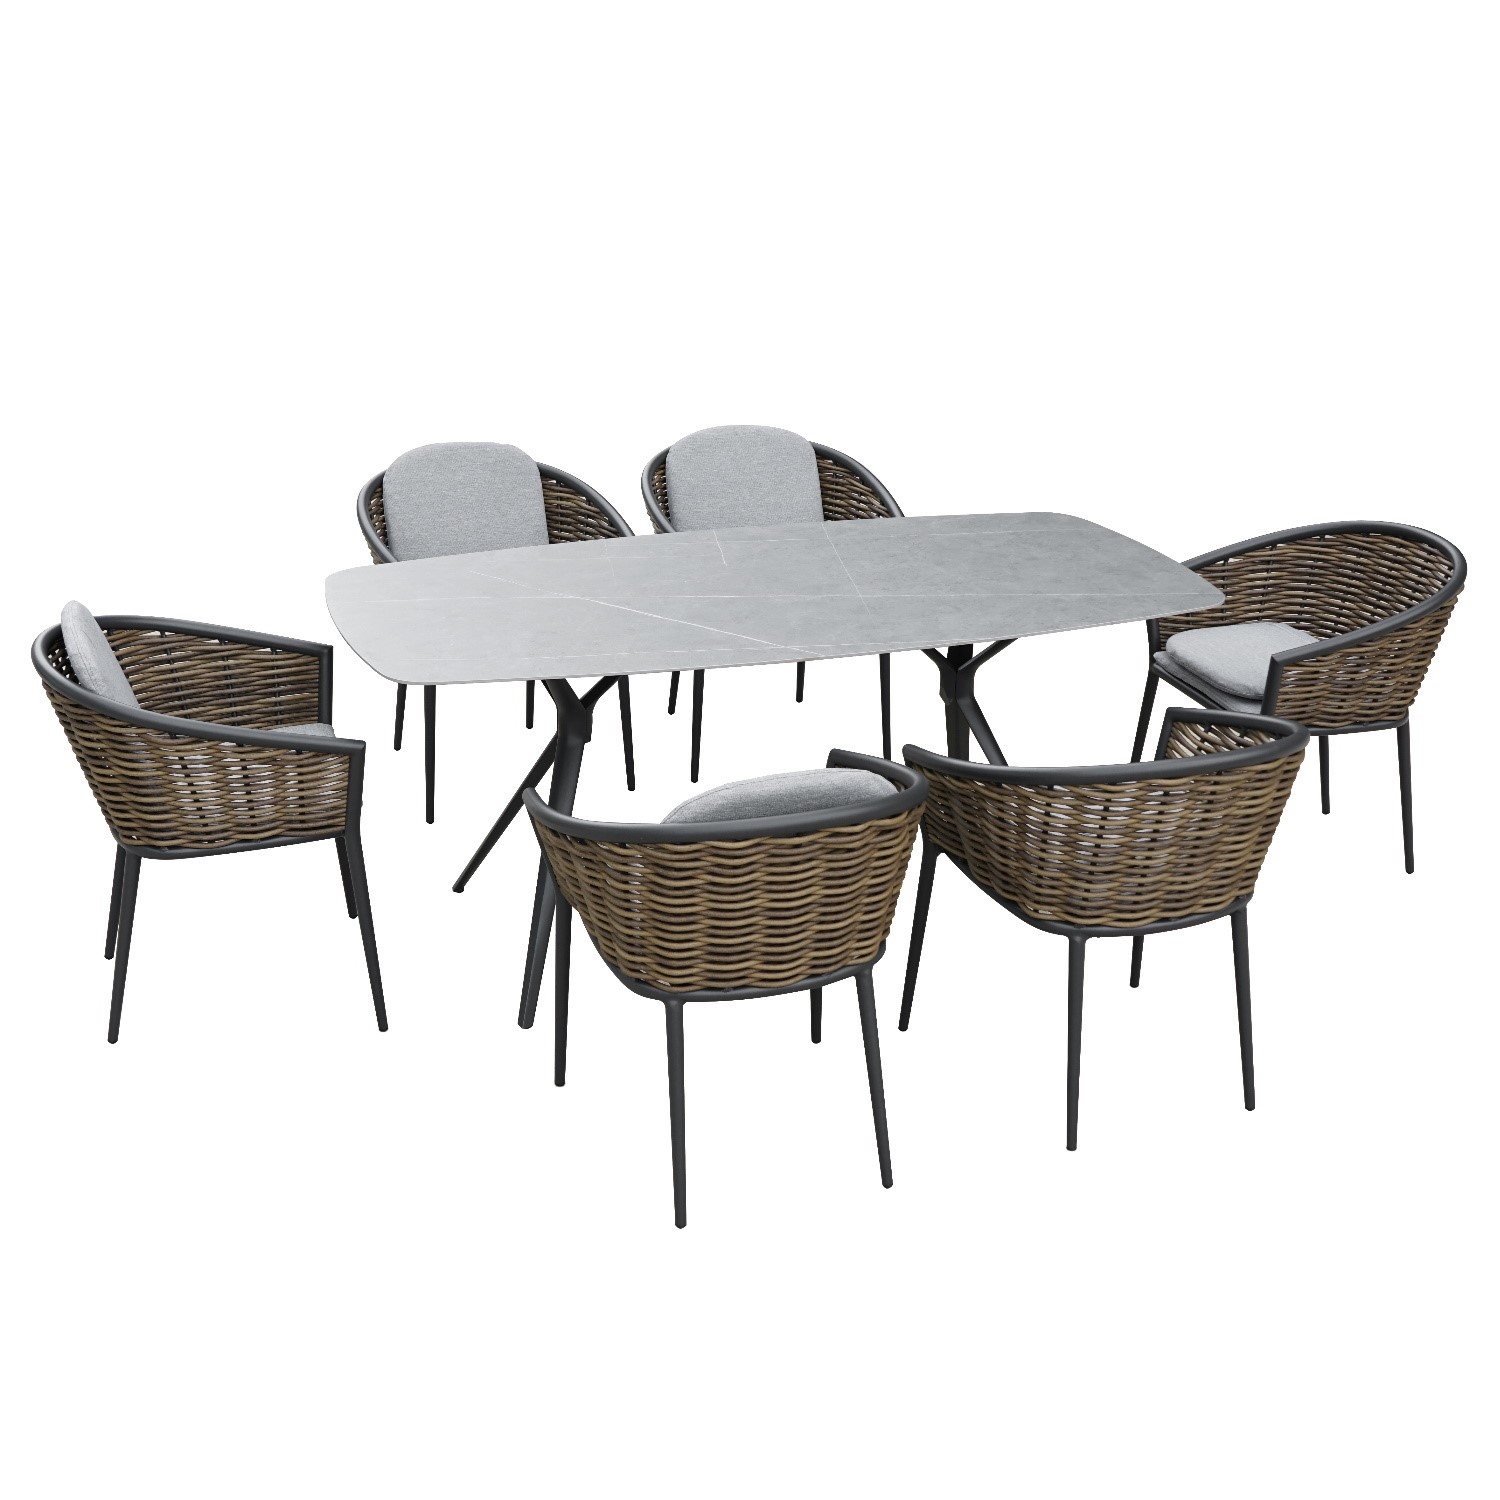 Read more about 6 seater garden dining set with woven wicker chairs & stone table top